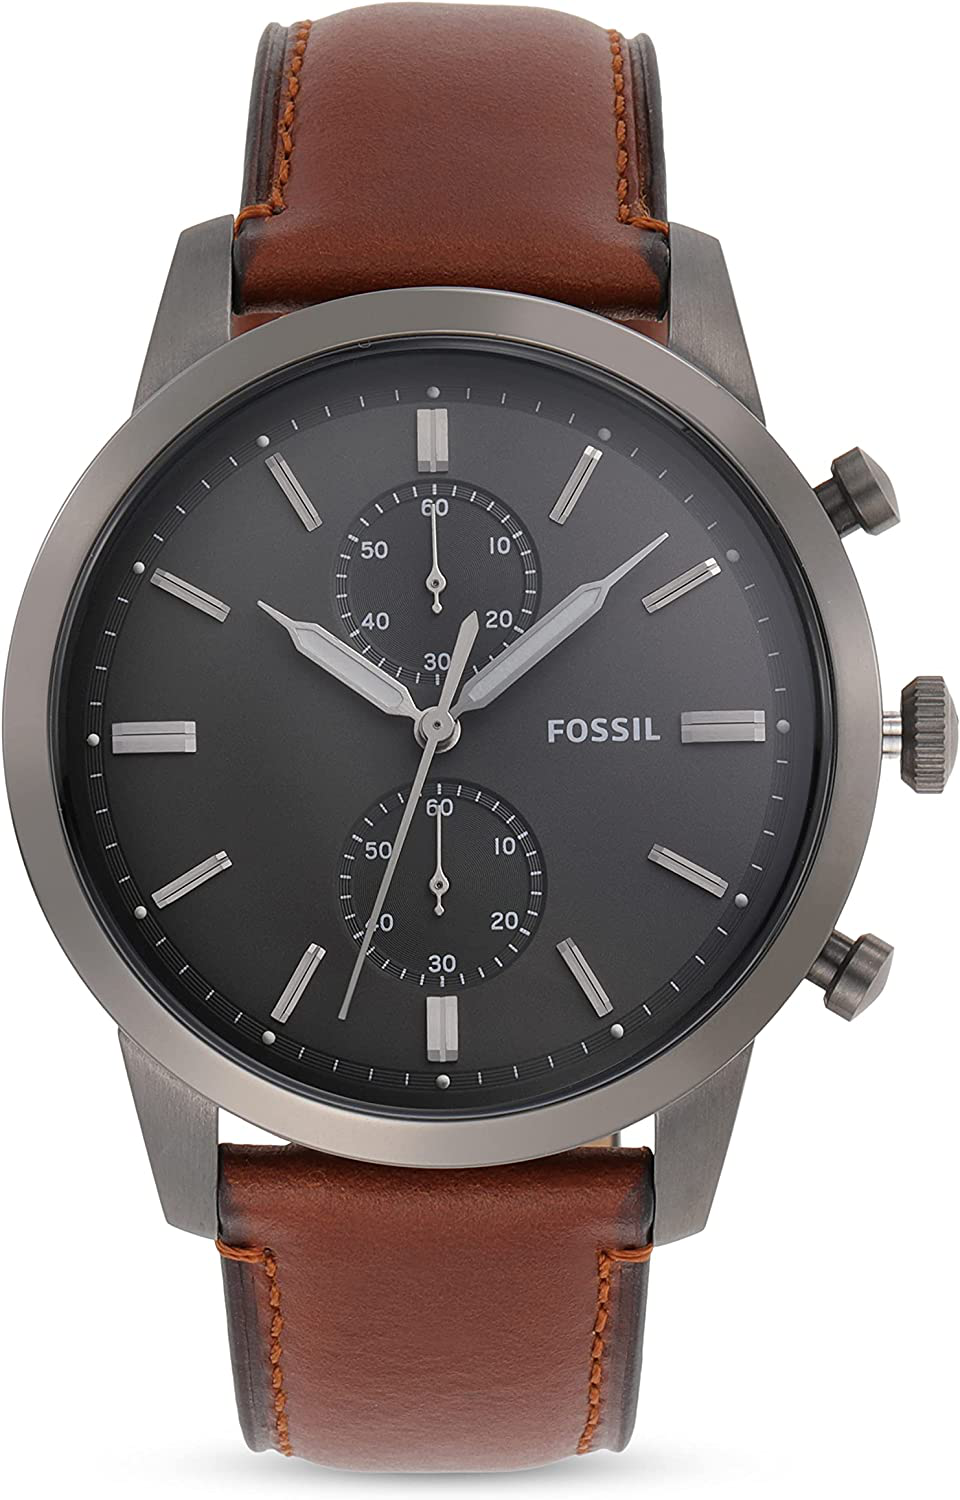 Fossil Men's Townsman Stainless Steel and Leather Casual Quartz Chronograph Watch